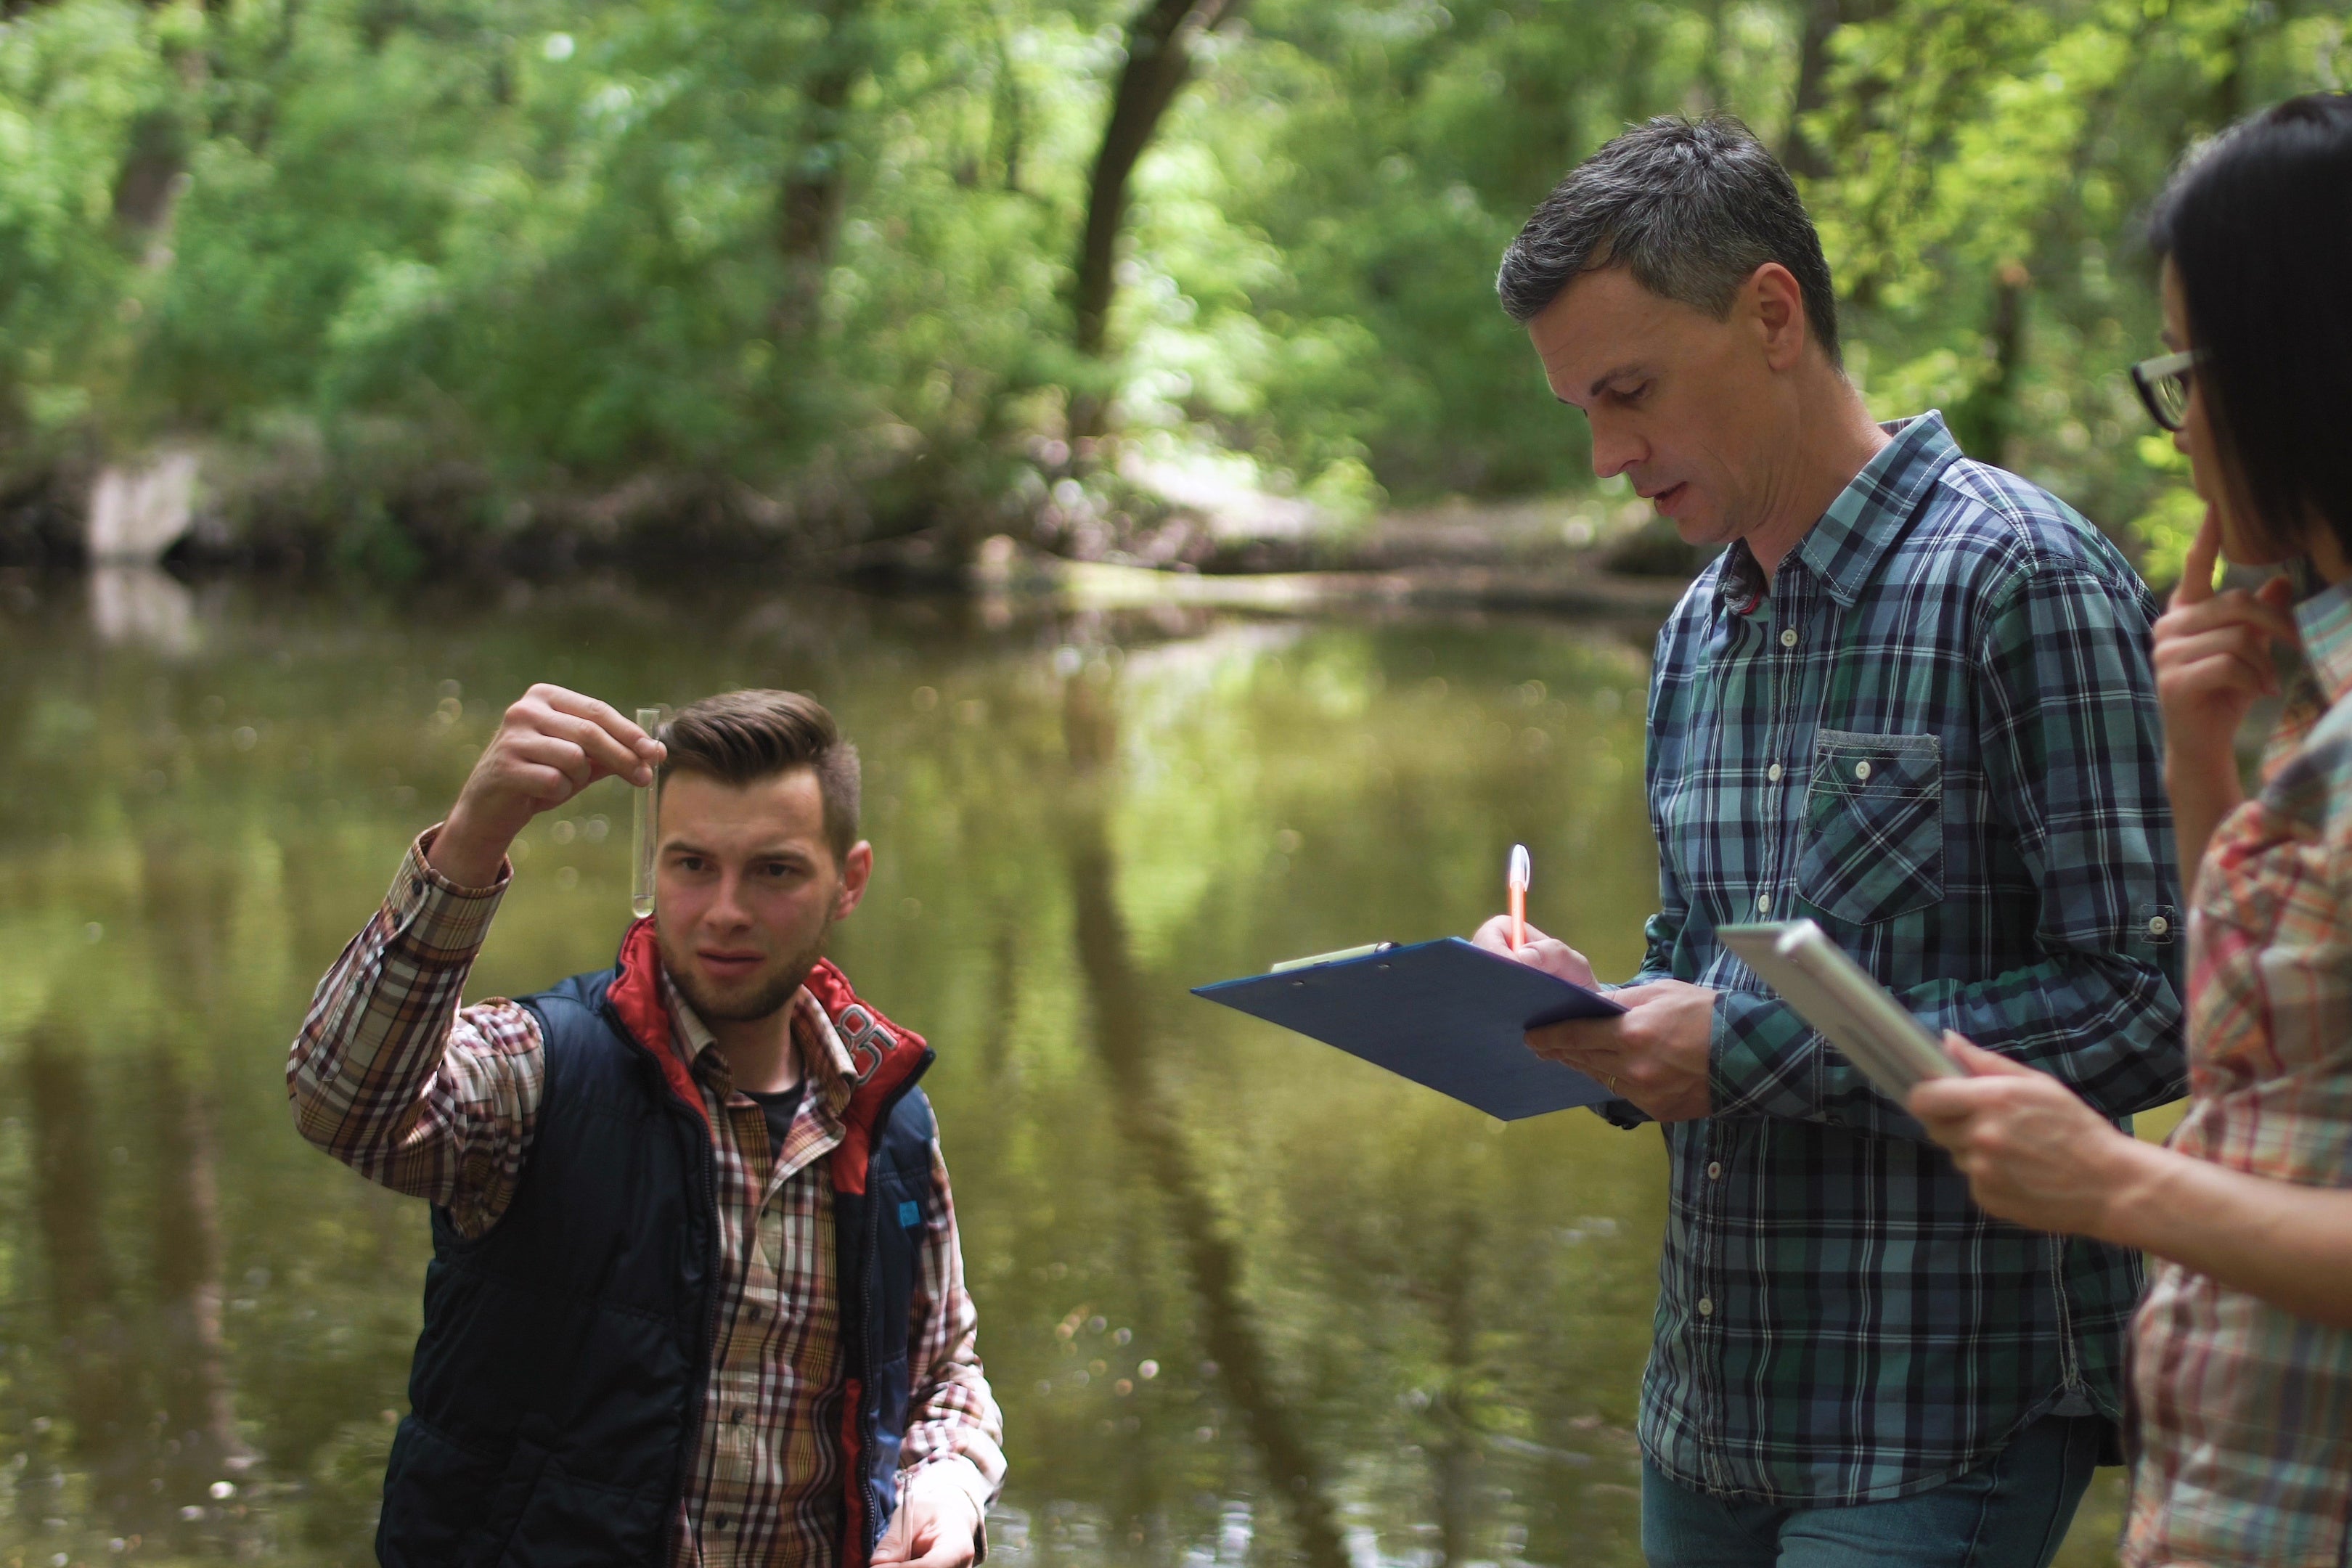 Three scientists analyze a water sample from a lake.